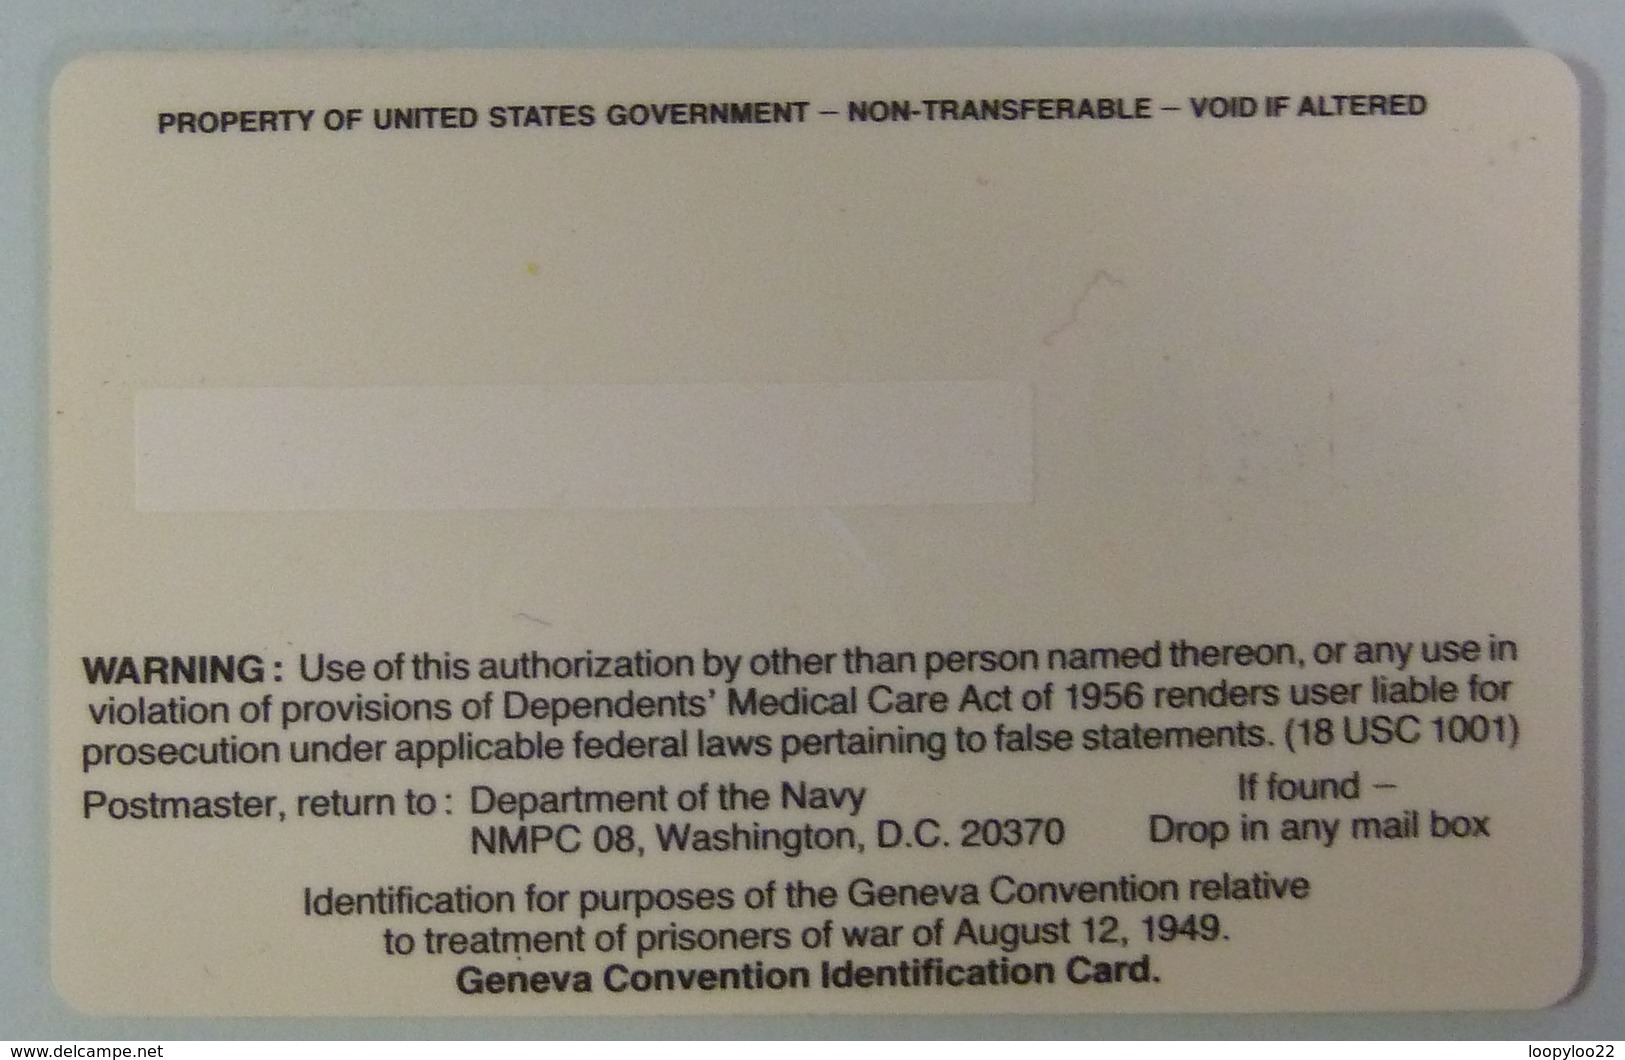 USA - Philips - Armed Forces - Trial - Uniformed Services Identification Card Test - 1982 - Green - RARE - [2] Chip Cards